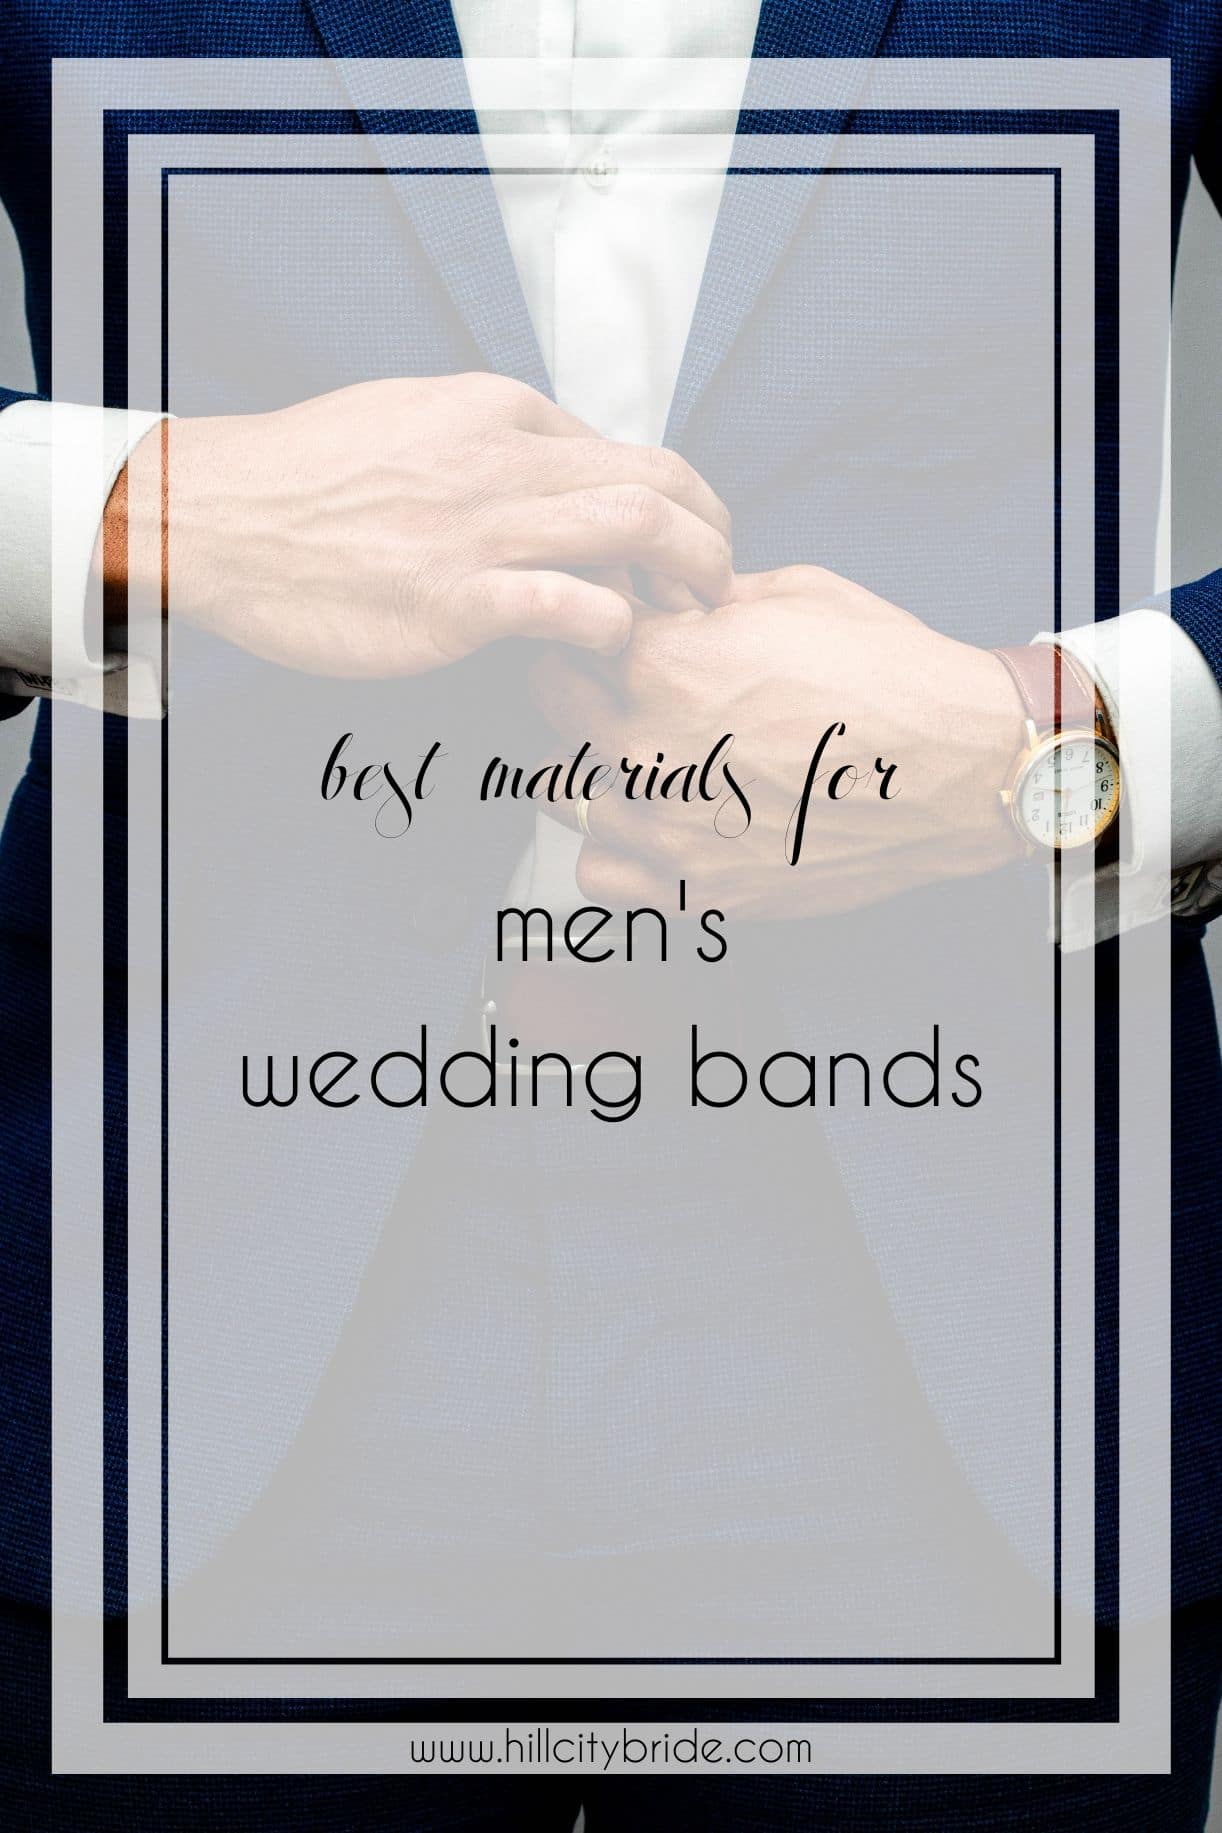 9 of the Best Materials for Men's Wedding Bands to Last a Lifetime